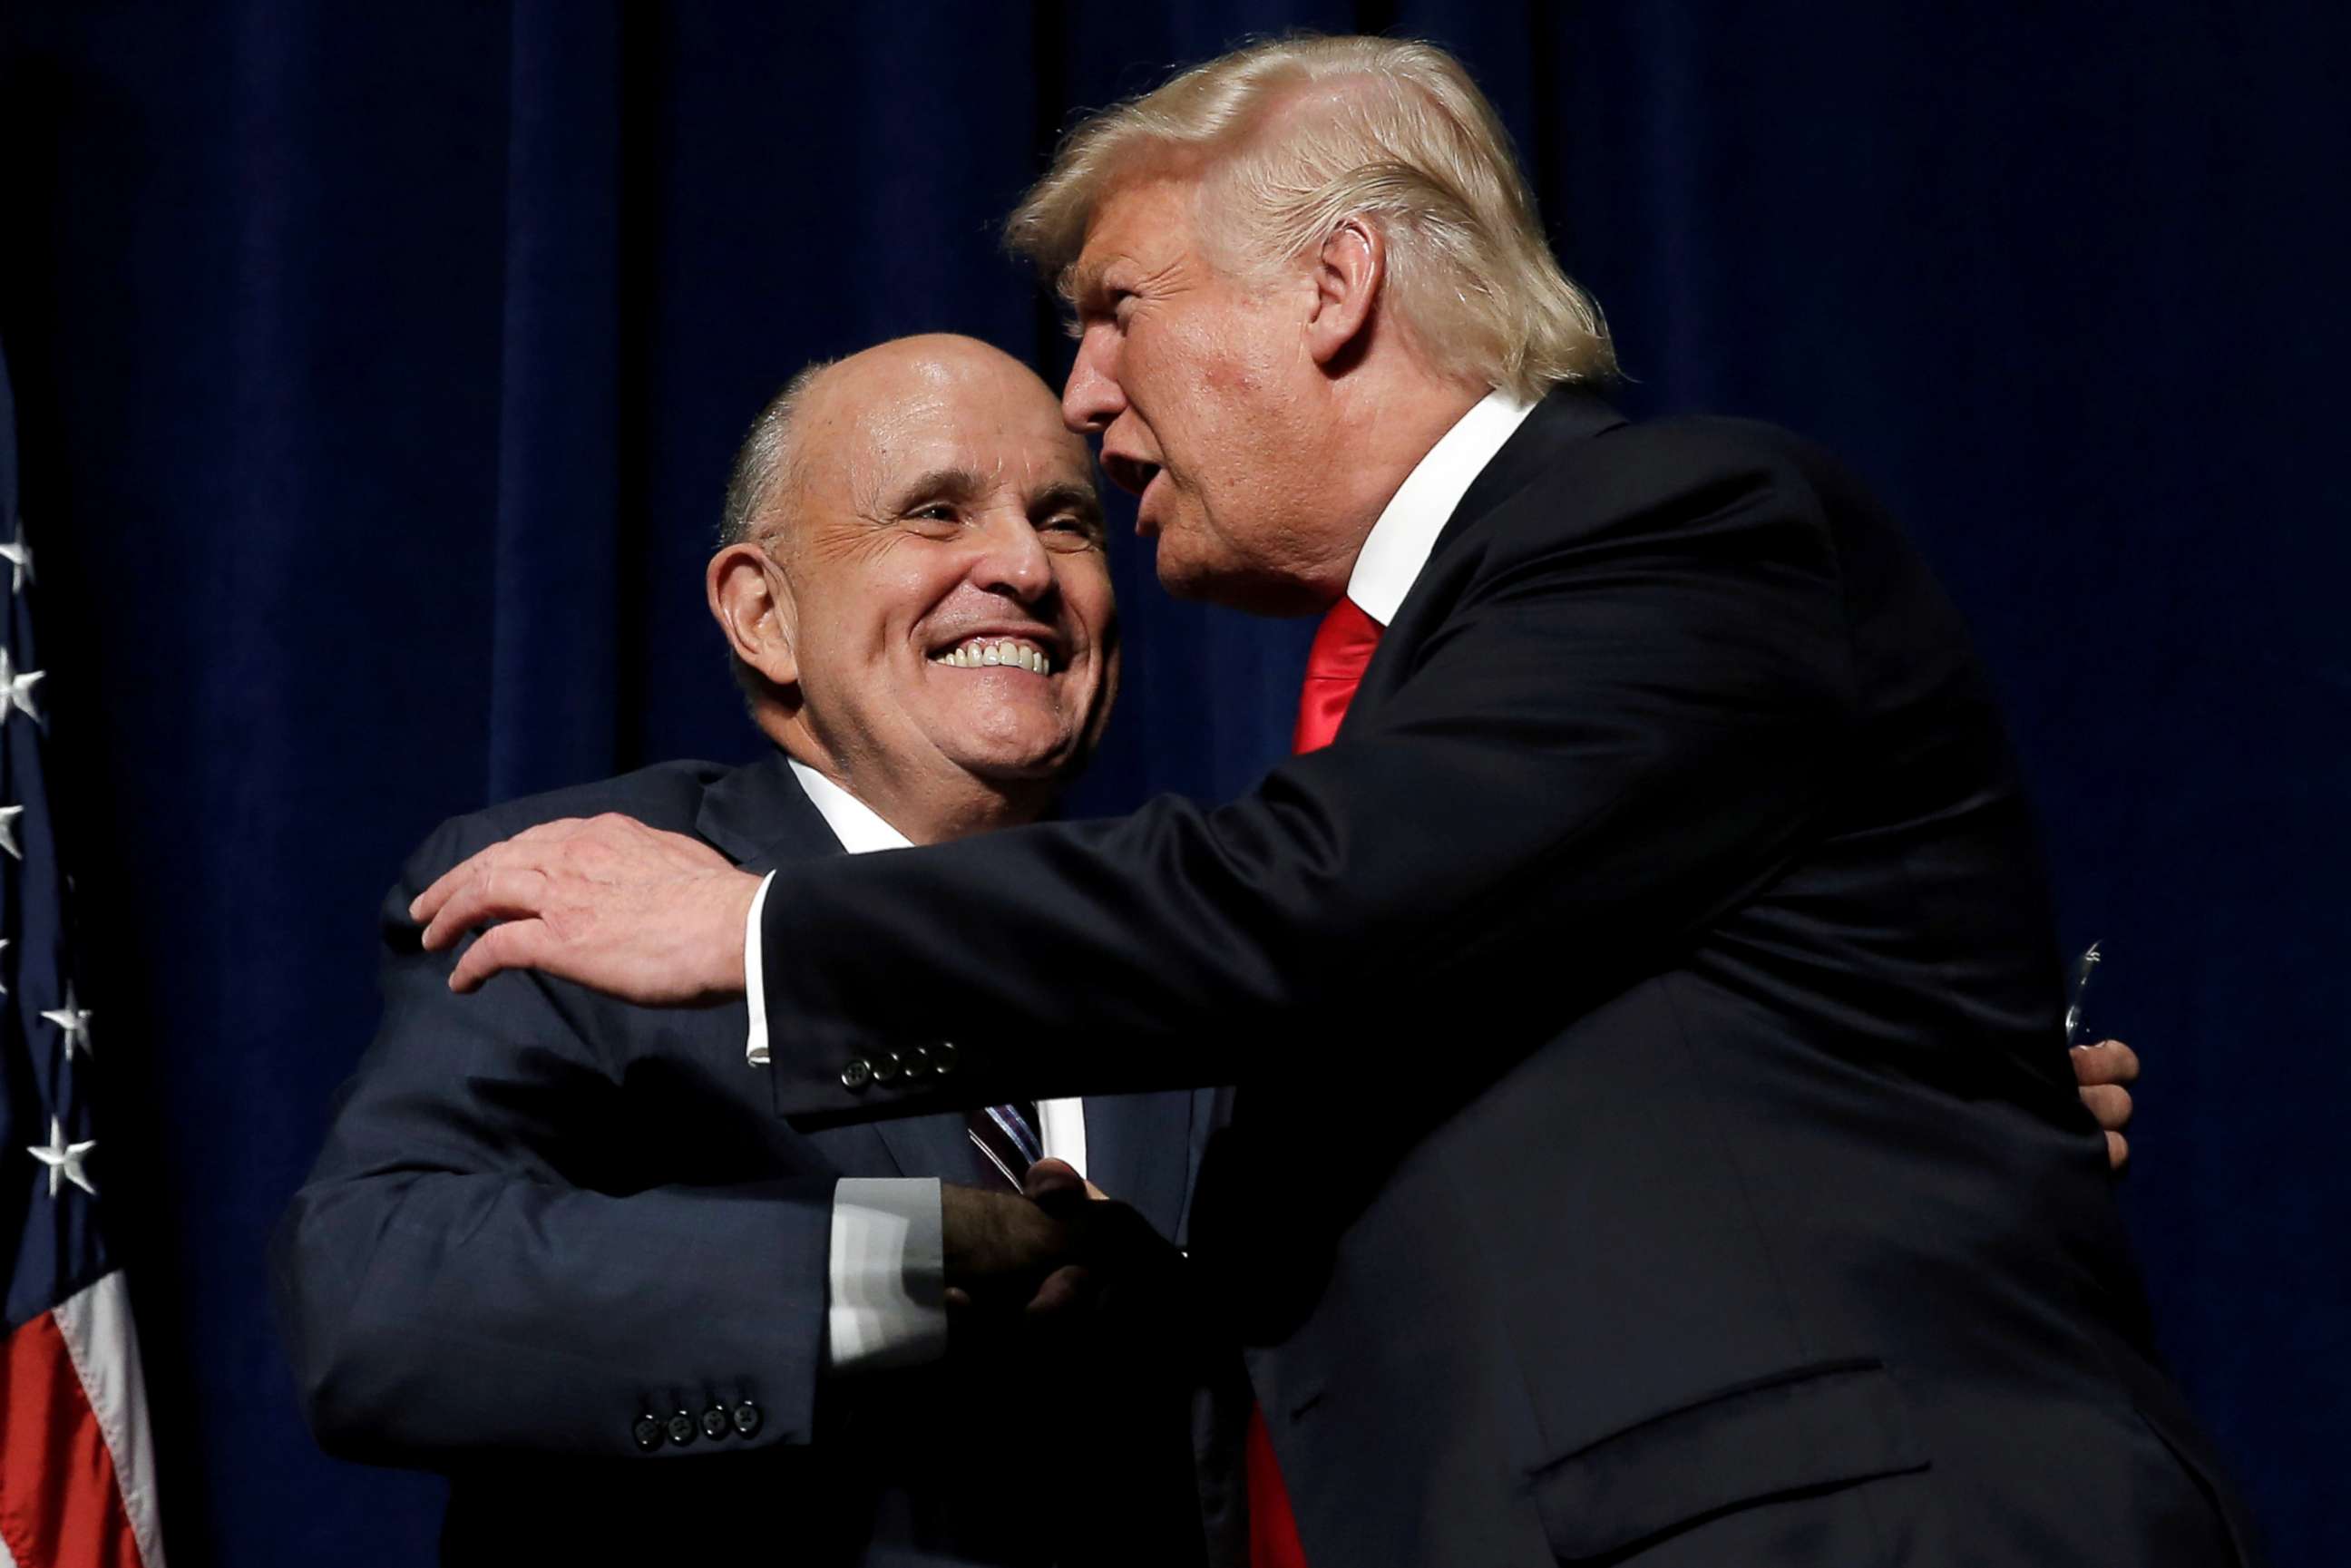 PHOTO: Republican presidential nominee Donald Trump embraces former New York City Mayor Rudolf Giuliani at a campaign rally in Greenville, N.C., Sept. 6, 2016.